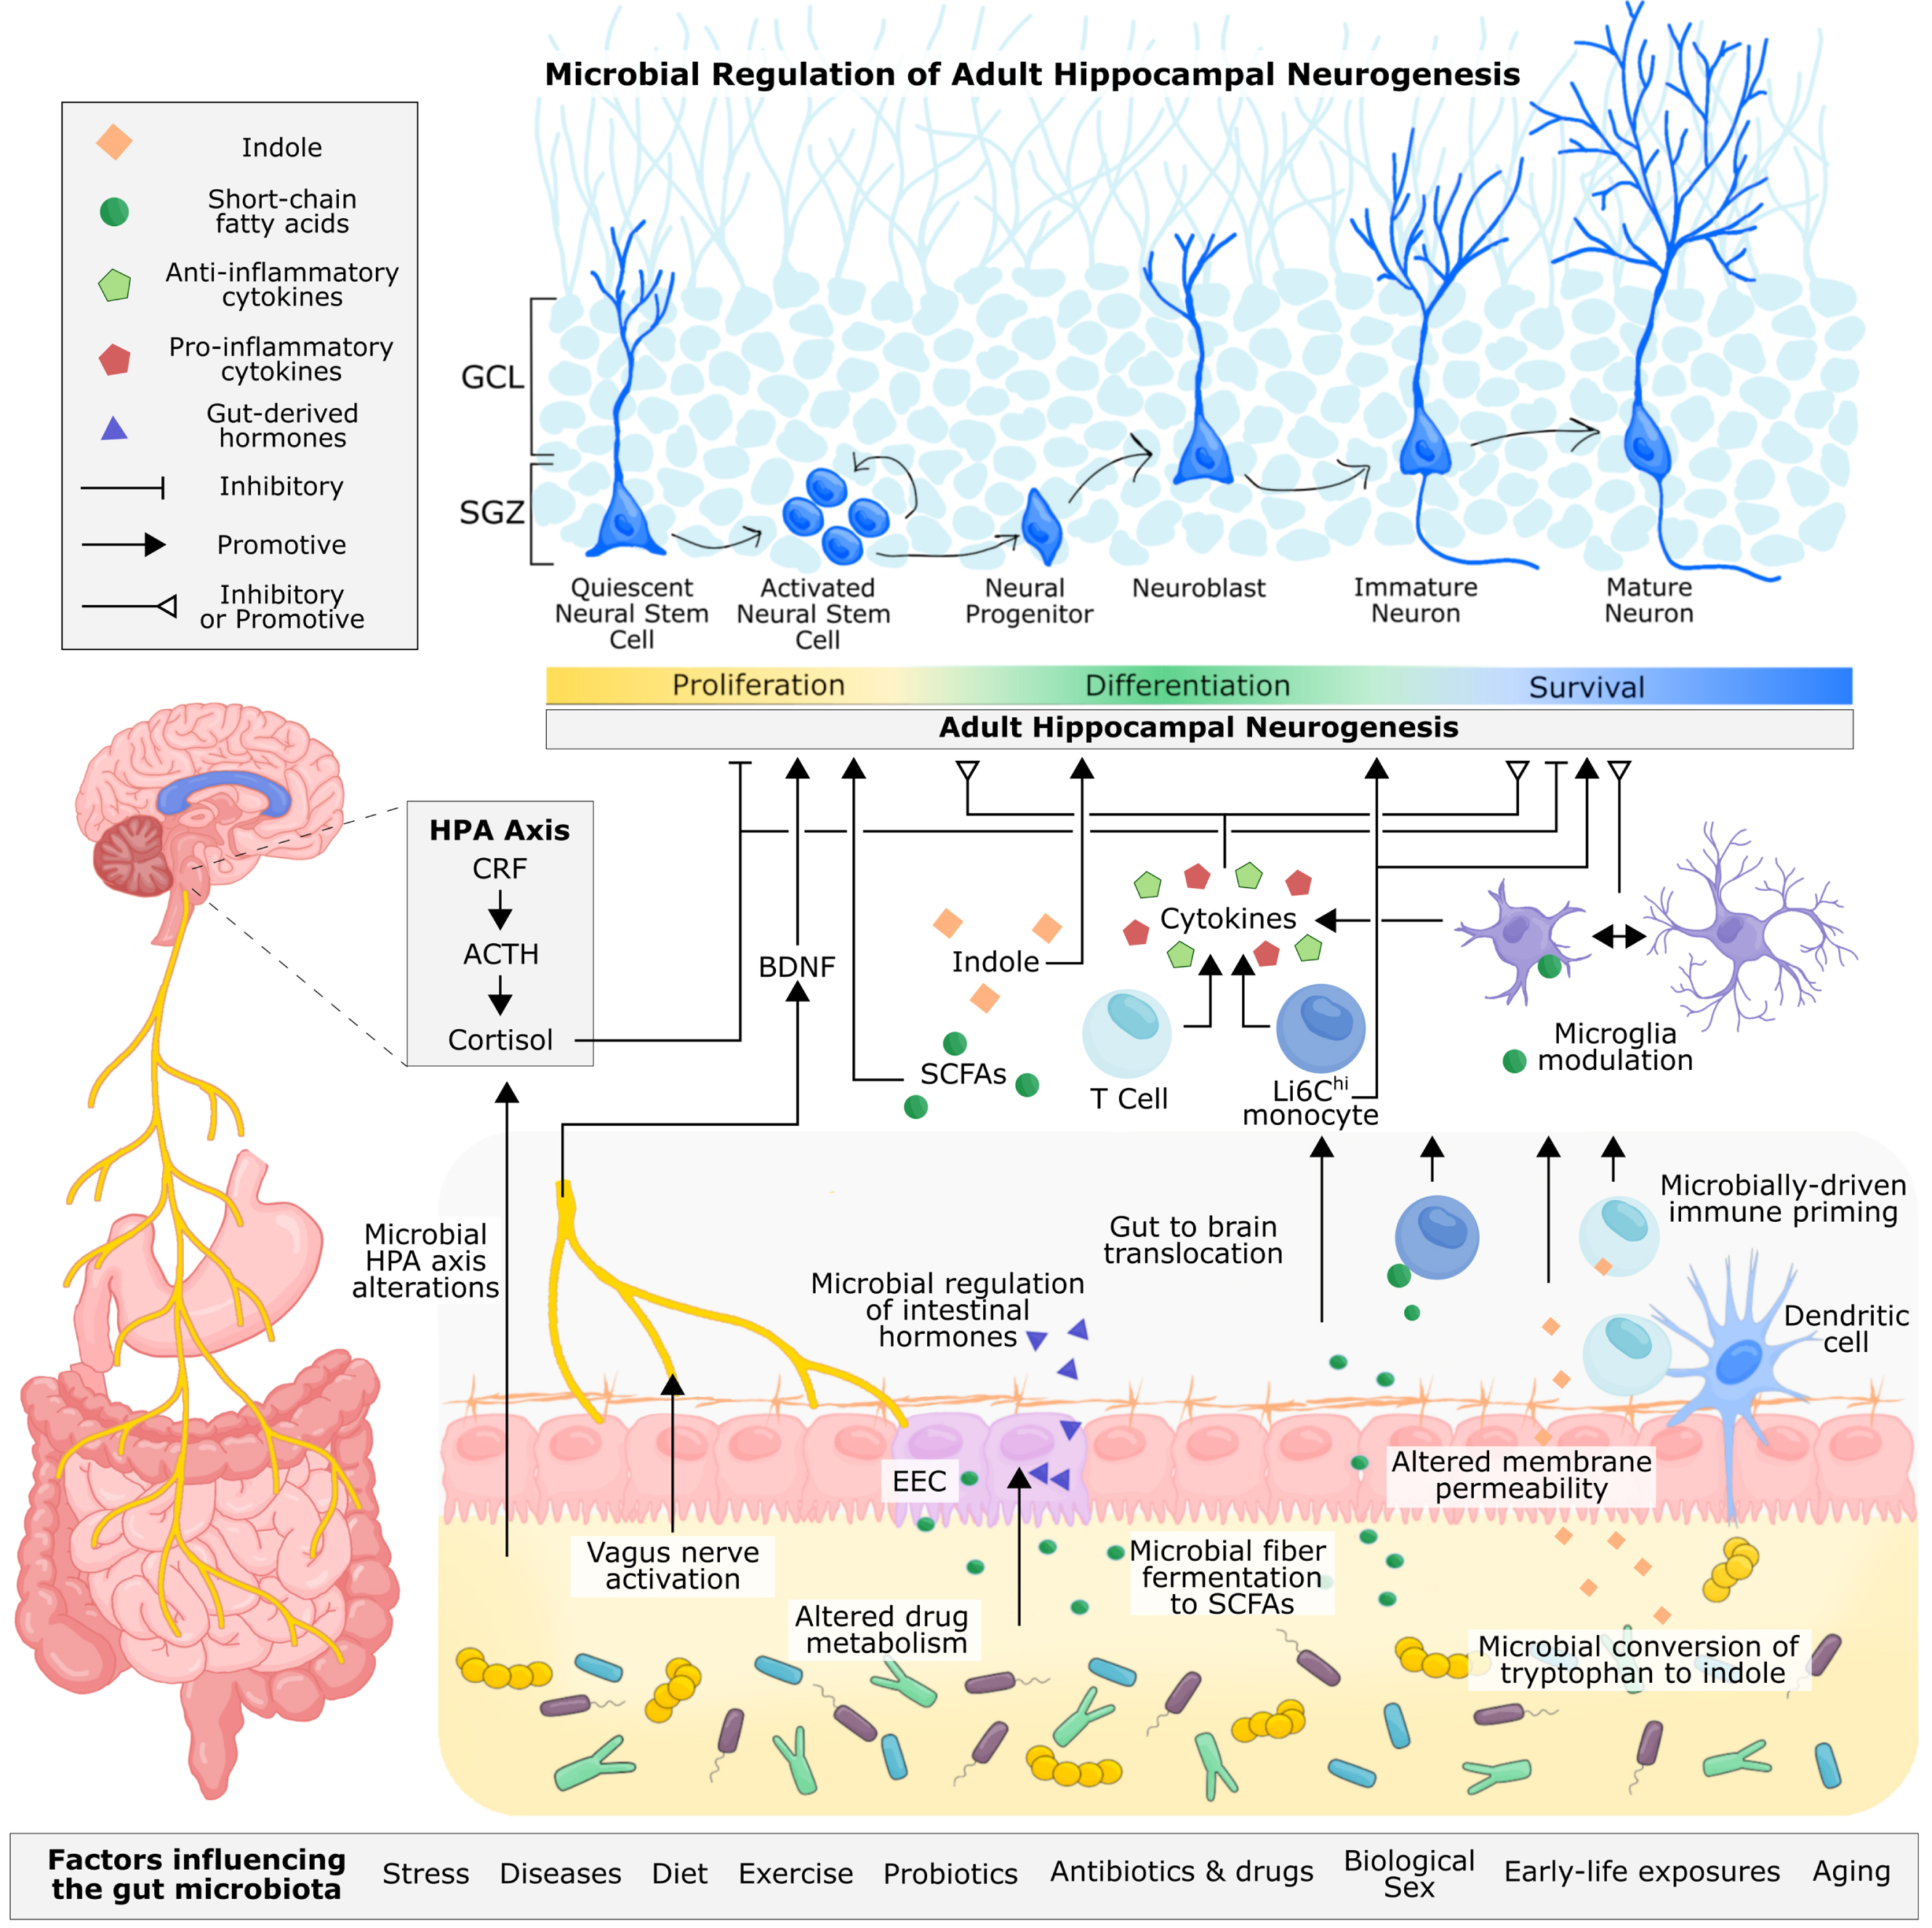 Proposed and established mechanisms of microbial regulation of adult hippocampal neurogenesis. Microbe-derived signals can be transmitted to the brain through neuronal, endocrine, metabolite-driven, and immune pathways. The vagus nerve allows for direct neuronal transmission of gut signals to the nucleus tractus solitarius in the brain, which can be relayed to the hippocampus via the medial septum. Through fecal microbiota transplant and probiotic supplementation, microbial signalling from the gut has been shown to alter levels of hippocampal BDNF and influence adult hippocampal neurogenesis. Immune cells circulating the gut, including monocytes and T cells, are sensitive to the gut microbiota, reacting to microbial cell wall components, such as lippopolysaccharide, and microbially-produced metabolites, such as short-chain fatty acids and indoles, that permeate the intestinal epithelium. These immune cells are also primed by the gut microbiota during early life, shaping their functionality in adulthood. T cells and monocytes can traffic to the brain, where they, along with resident microglia, can produce pro-inflammatory and anti-inflammatory cytokines, which have been shown to inhibit or promote hippocampal neurogenesis. Microglia are also sensitive to microbially-produced short-chain fatty acids, which can cross the intestinal epithelium and blood-brain barrier to directly modulate the functionality of microglia. In addition to cytokine production, microglia are responsible for pruning neuronal dendrites and supporting neuronal development and survival. The gut microbiota can metabolize tryptophan, a precursor to serotonin, kynurenine, and indole. Indole produced by the gut microbiota can directly bind to aryl hydrocarbon receptors (AhR) on neural progenitor cells, promoting neuronal differentiation. Immune cells are also sensitive to indoles through AhR receptors. Intestinal neurotransmitter and hormone production is mediated by enteroendocrine cells and under partial control by the gut microbiota, but whether microbial regulation of these metabolites directly influences adult hippocampal neurogenesis in vivo is unconfirmed. Studies involving germ-free mice and microbiota transplantation have demonstrated the importance of the gut microbiota for regulating the HPA axis, which contributes to the production of cortisol (or corticosterone in rodents). Glucocorticoids can directly bind to receptors on progenitor cells and immature neurons and generally have a supressive effect on hippocampal neuron proliferation and survival of newborn neurons. In addition to adult hippocampal neurogenesis, the gut microbiota contributes to neuroplasticity, long term potentiation, and intestinal barrier and blood brain barrier permiability, which offers some mechanistic insight into how the gut microbiota may regulate adult hippocampal neurogenesis and related behaviour. Abbreviations: Adrenocorticotropic hormone (ACTH); brain-derived neurotrophic factor (BDNF); orticotropin-releasing factor (CRF); enteroendocrine cell (EEC); hypothalamus-pituitary-adrenal (HPA).